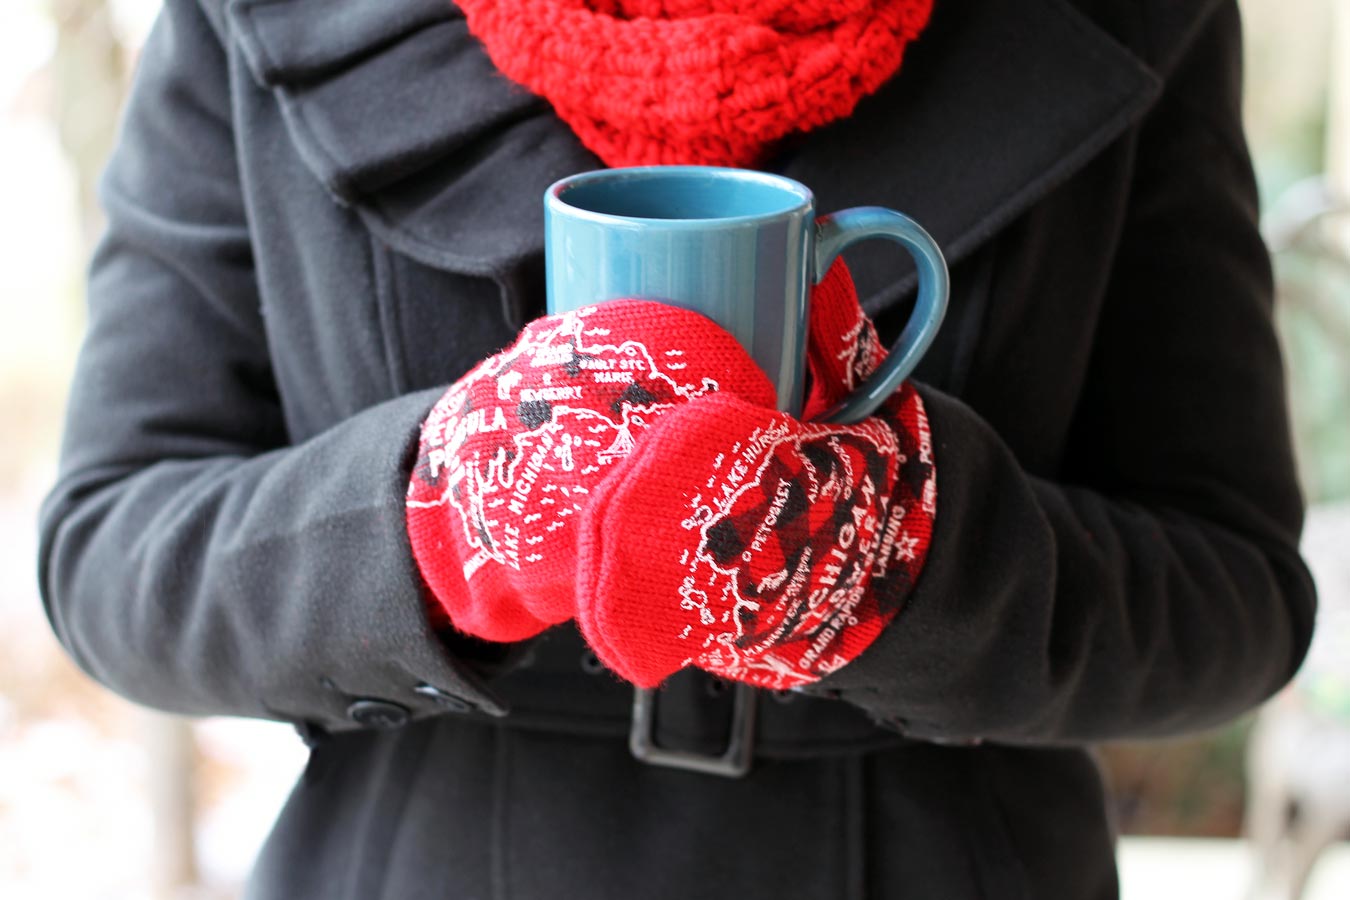 4 Fun Gift Ideas From Michigan Mittens // Check out the latest from Michigan Mittens - L'Oven Mitts, Hunter's Plaid Mittens, Old Maid in Michigan, and more! (via Wading in Big Shoes)